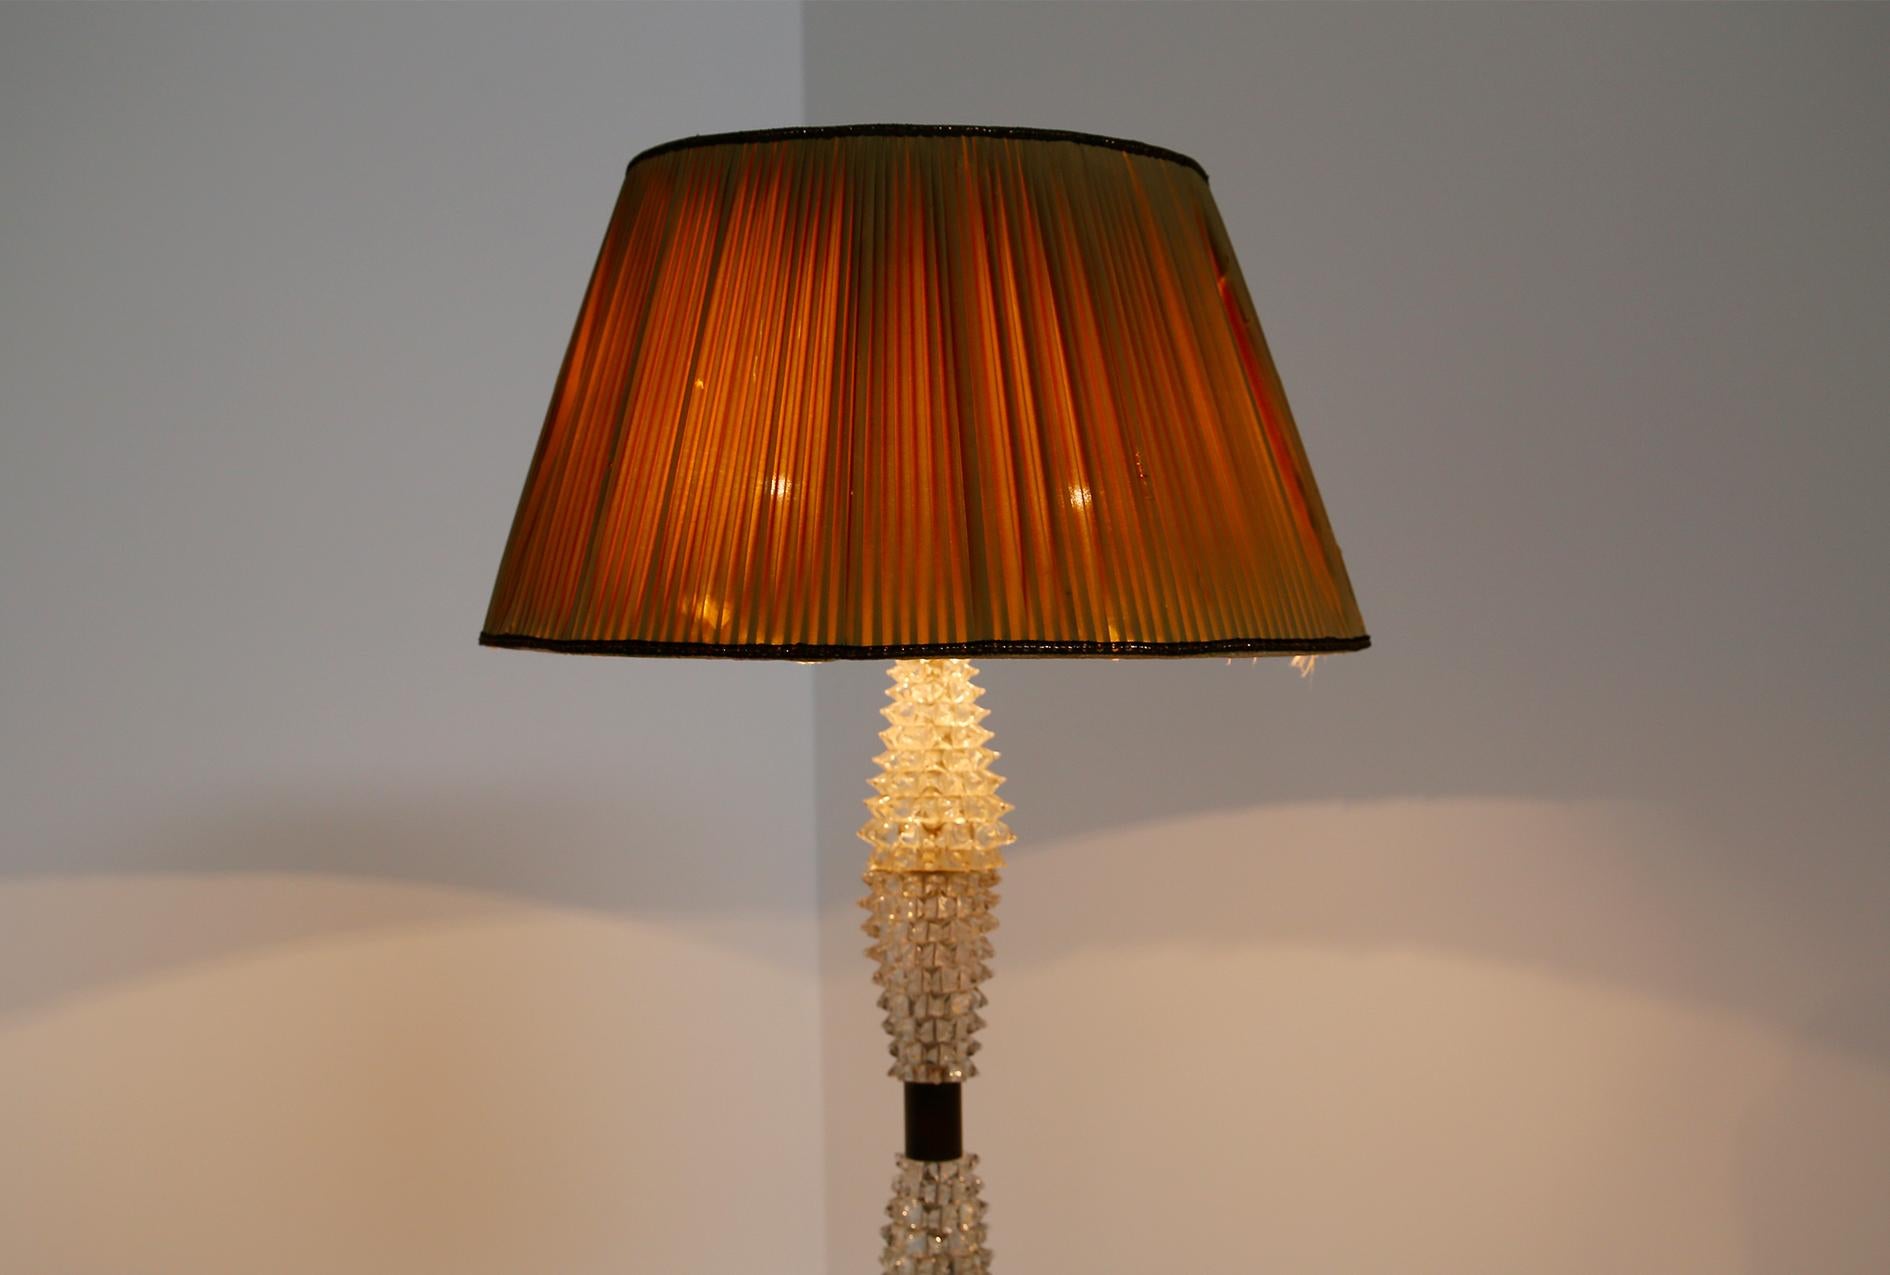 Elegant Italian floor lamp made by Barovier & Toso in 1940. The beauty of this lamp is given by its execution
in Rostrato glass that enhances its particularity. In fact the pyramid-shaped rostrato creates an elegant and defined design. At each